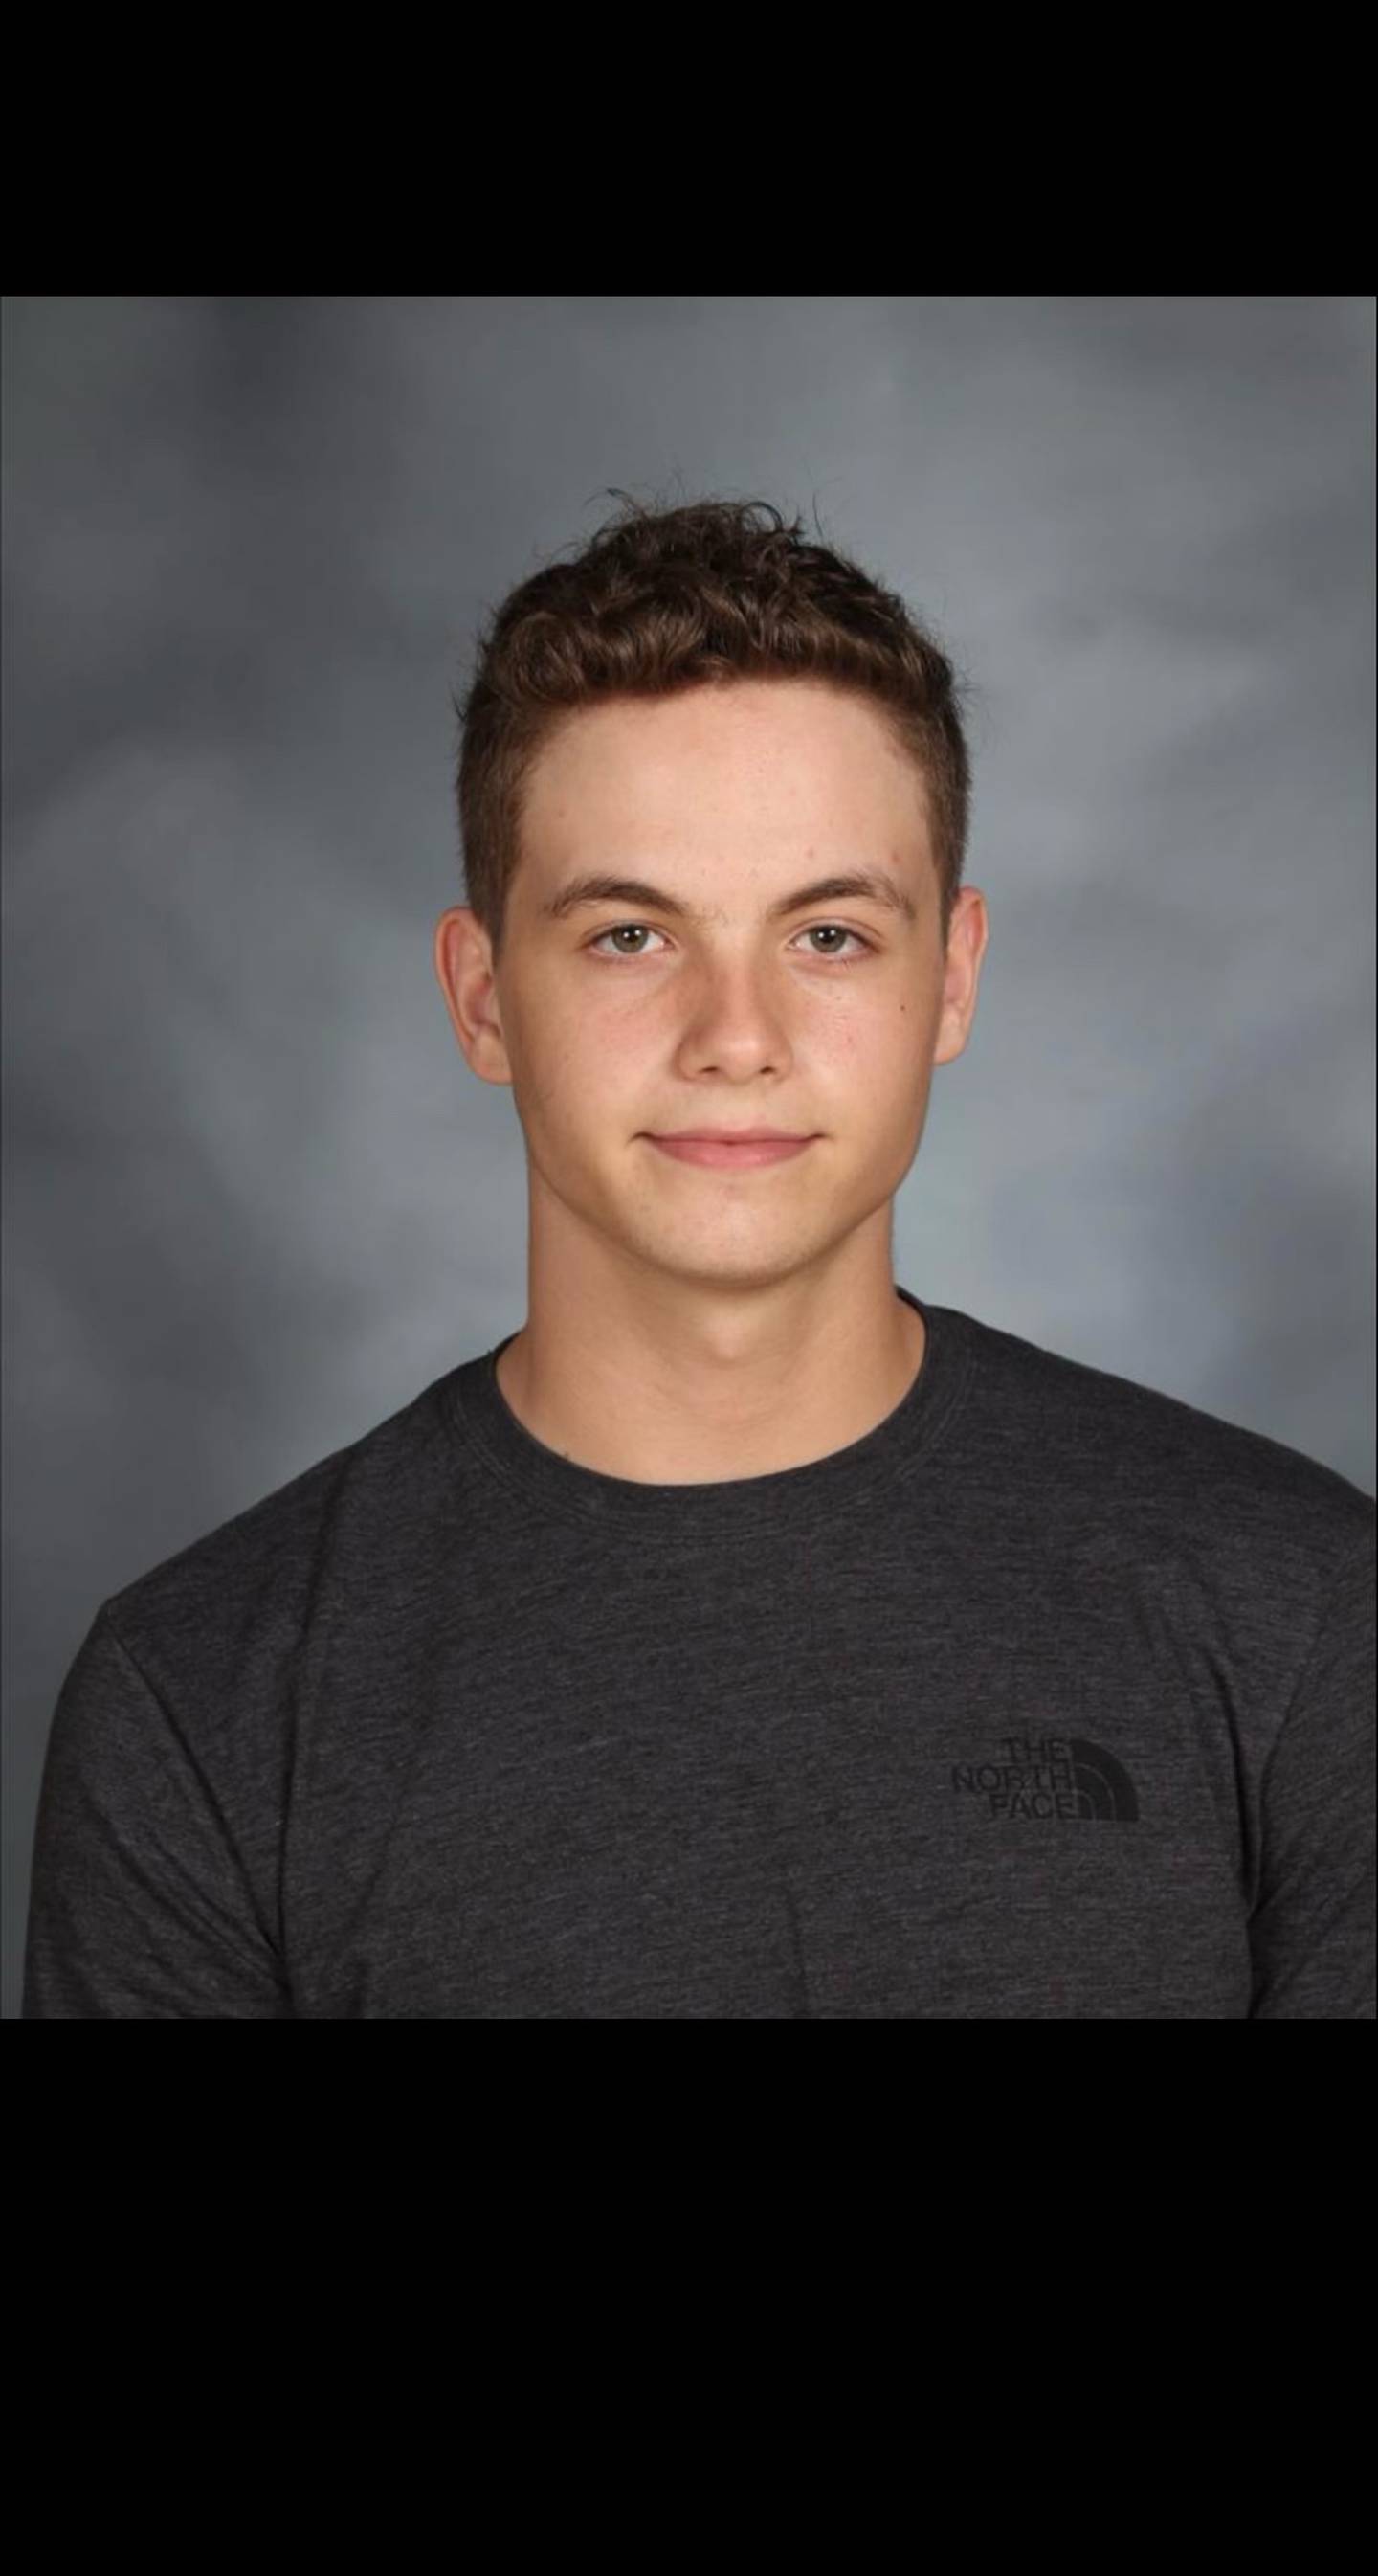 Batavia senior Bradley Beilfuss was awarded the Inspiring Career and Technical Achievers award. This scholarship is to reward a student interested in a trade or career in manufacturing.